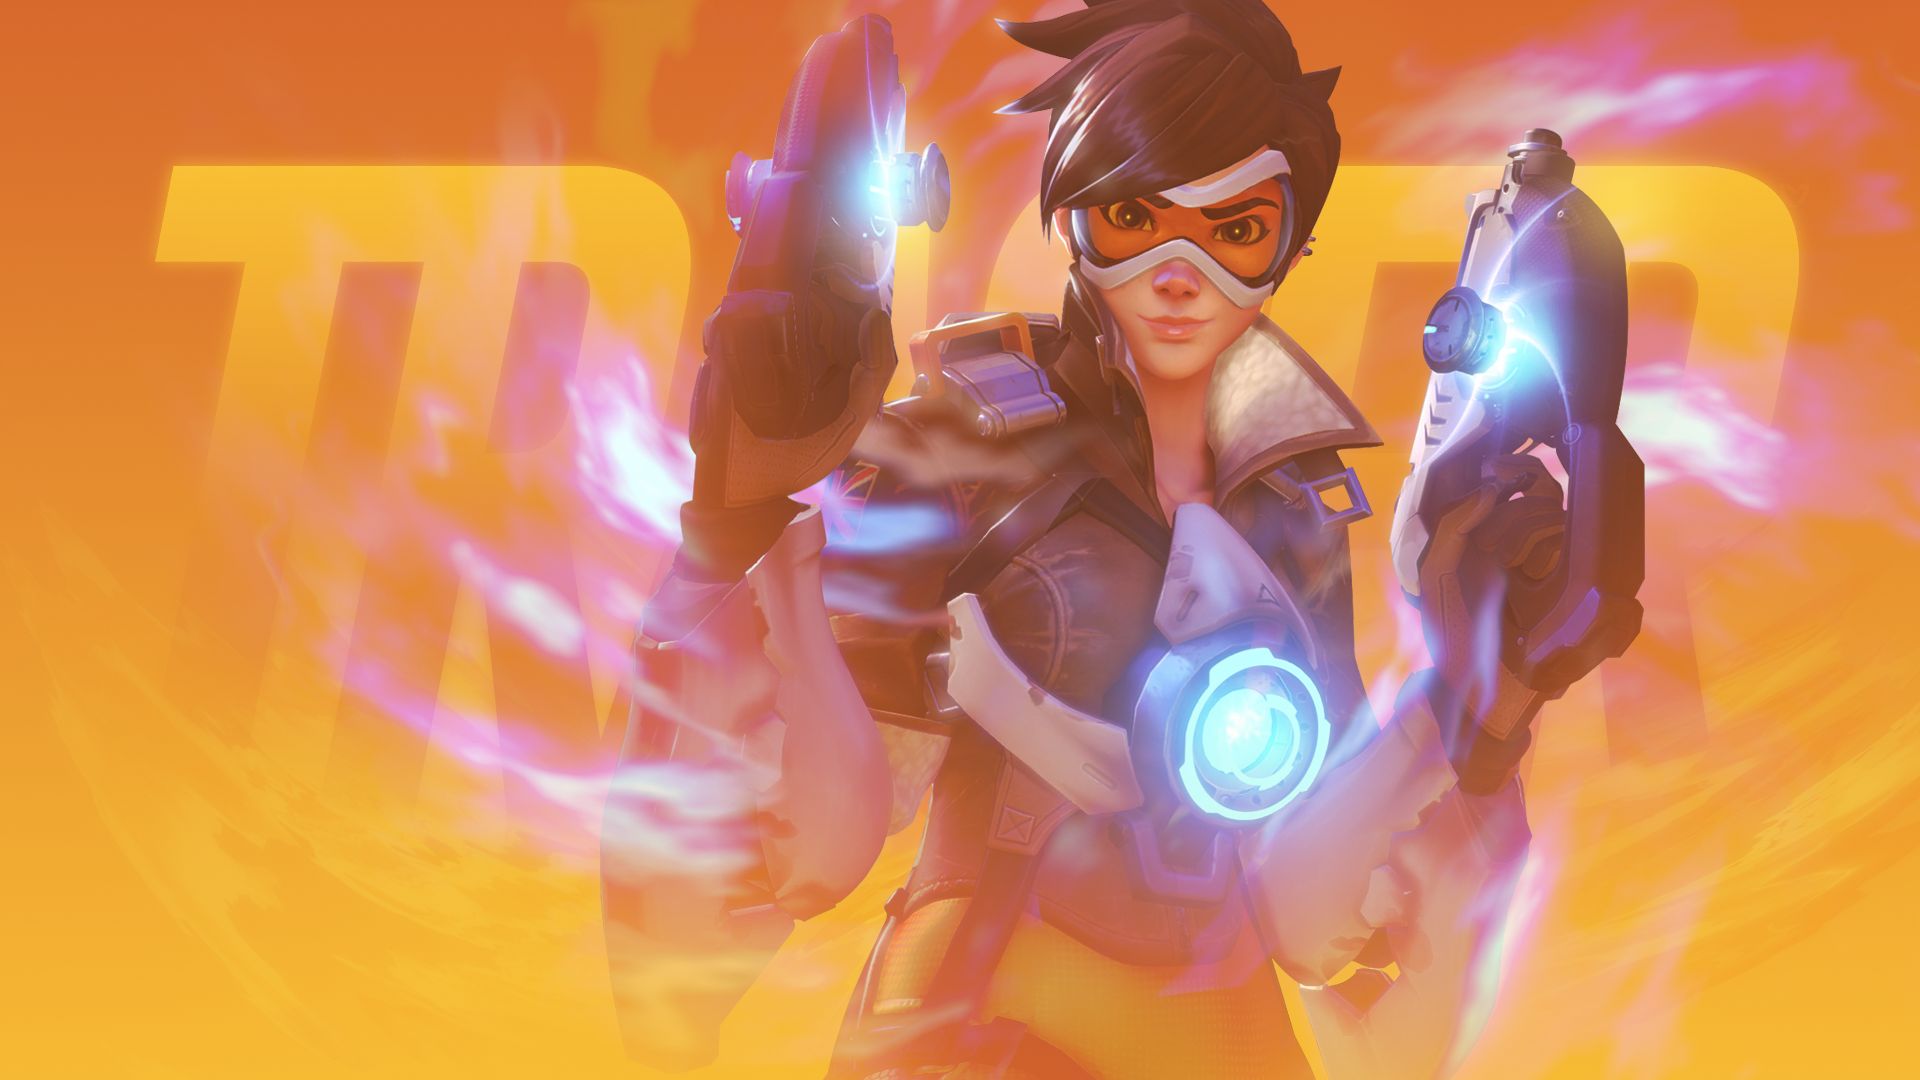 Download Tracer (Overwatch) wallpapers for mobile phone, free